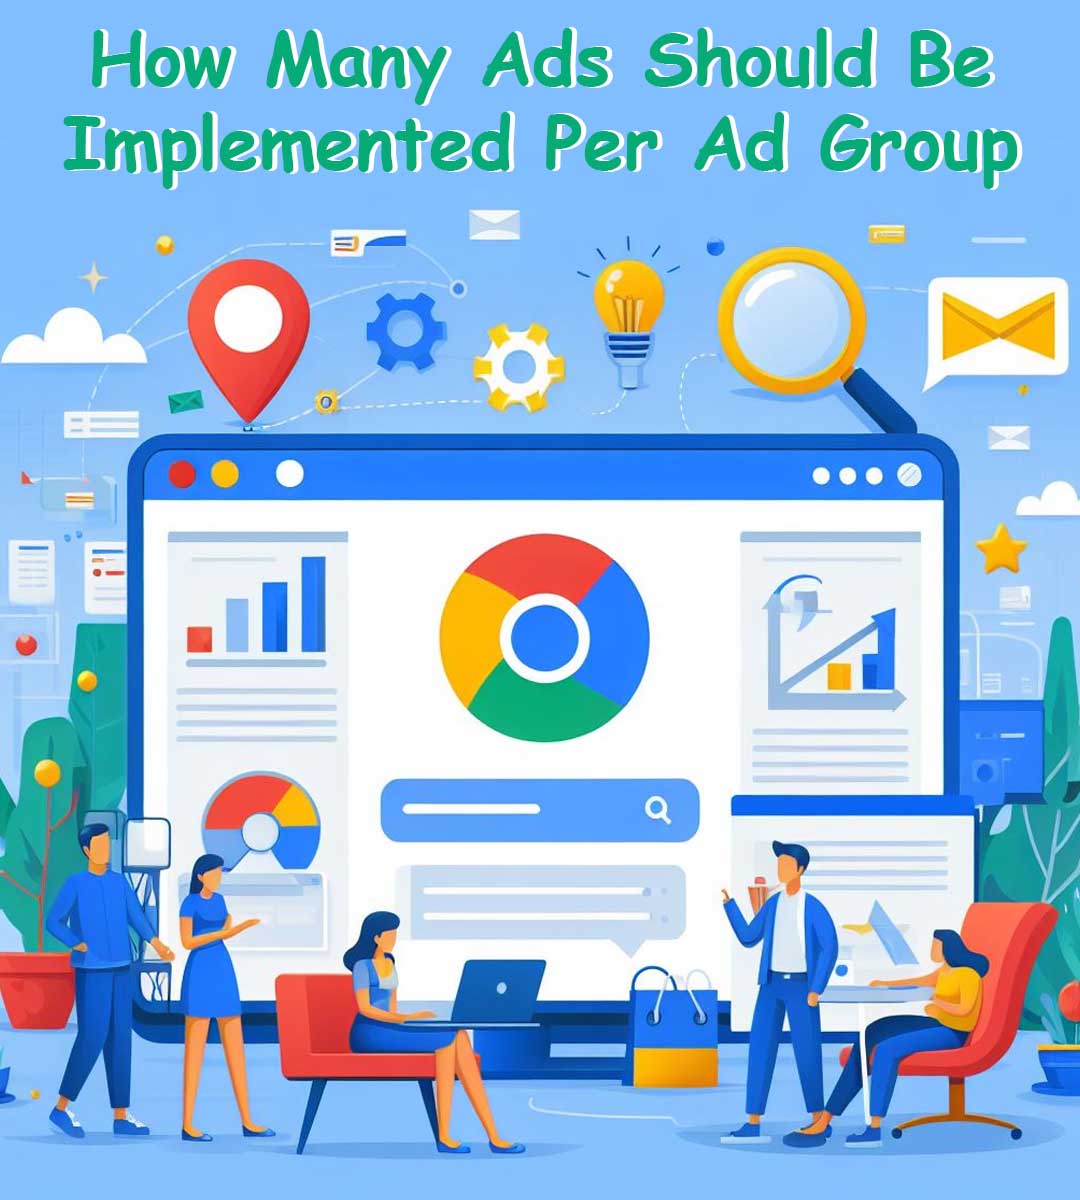 How Many Ads Should Be Implemented Per Ad Group